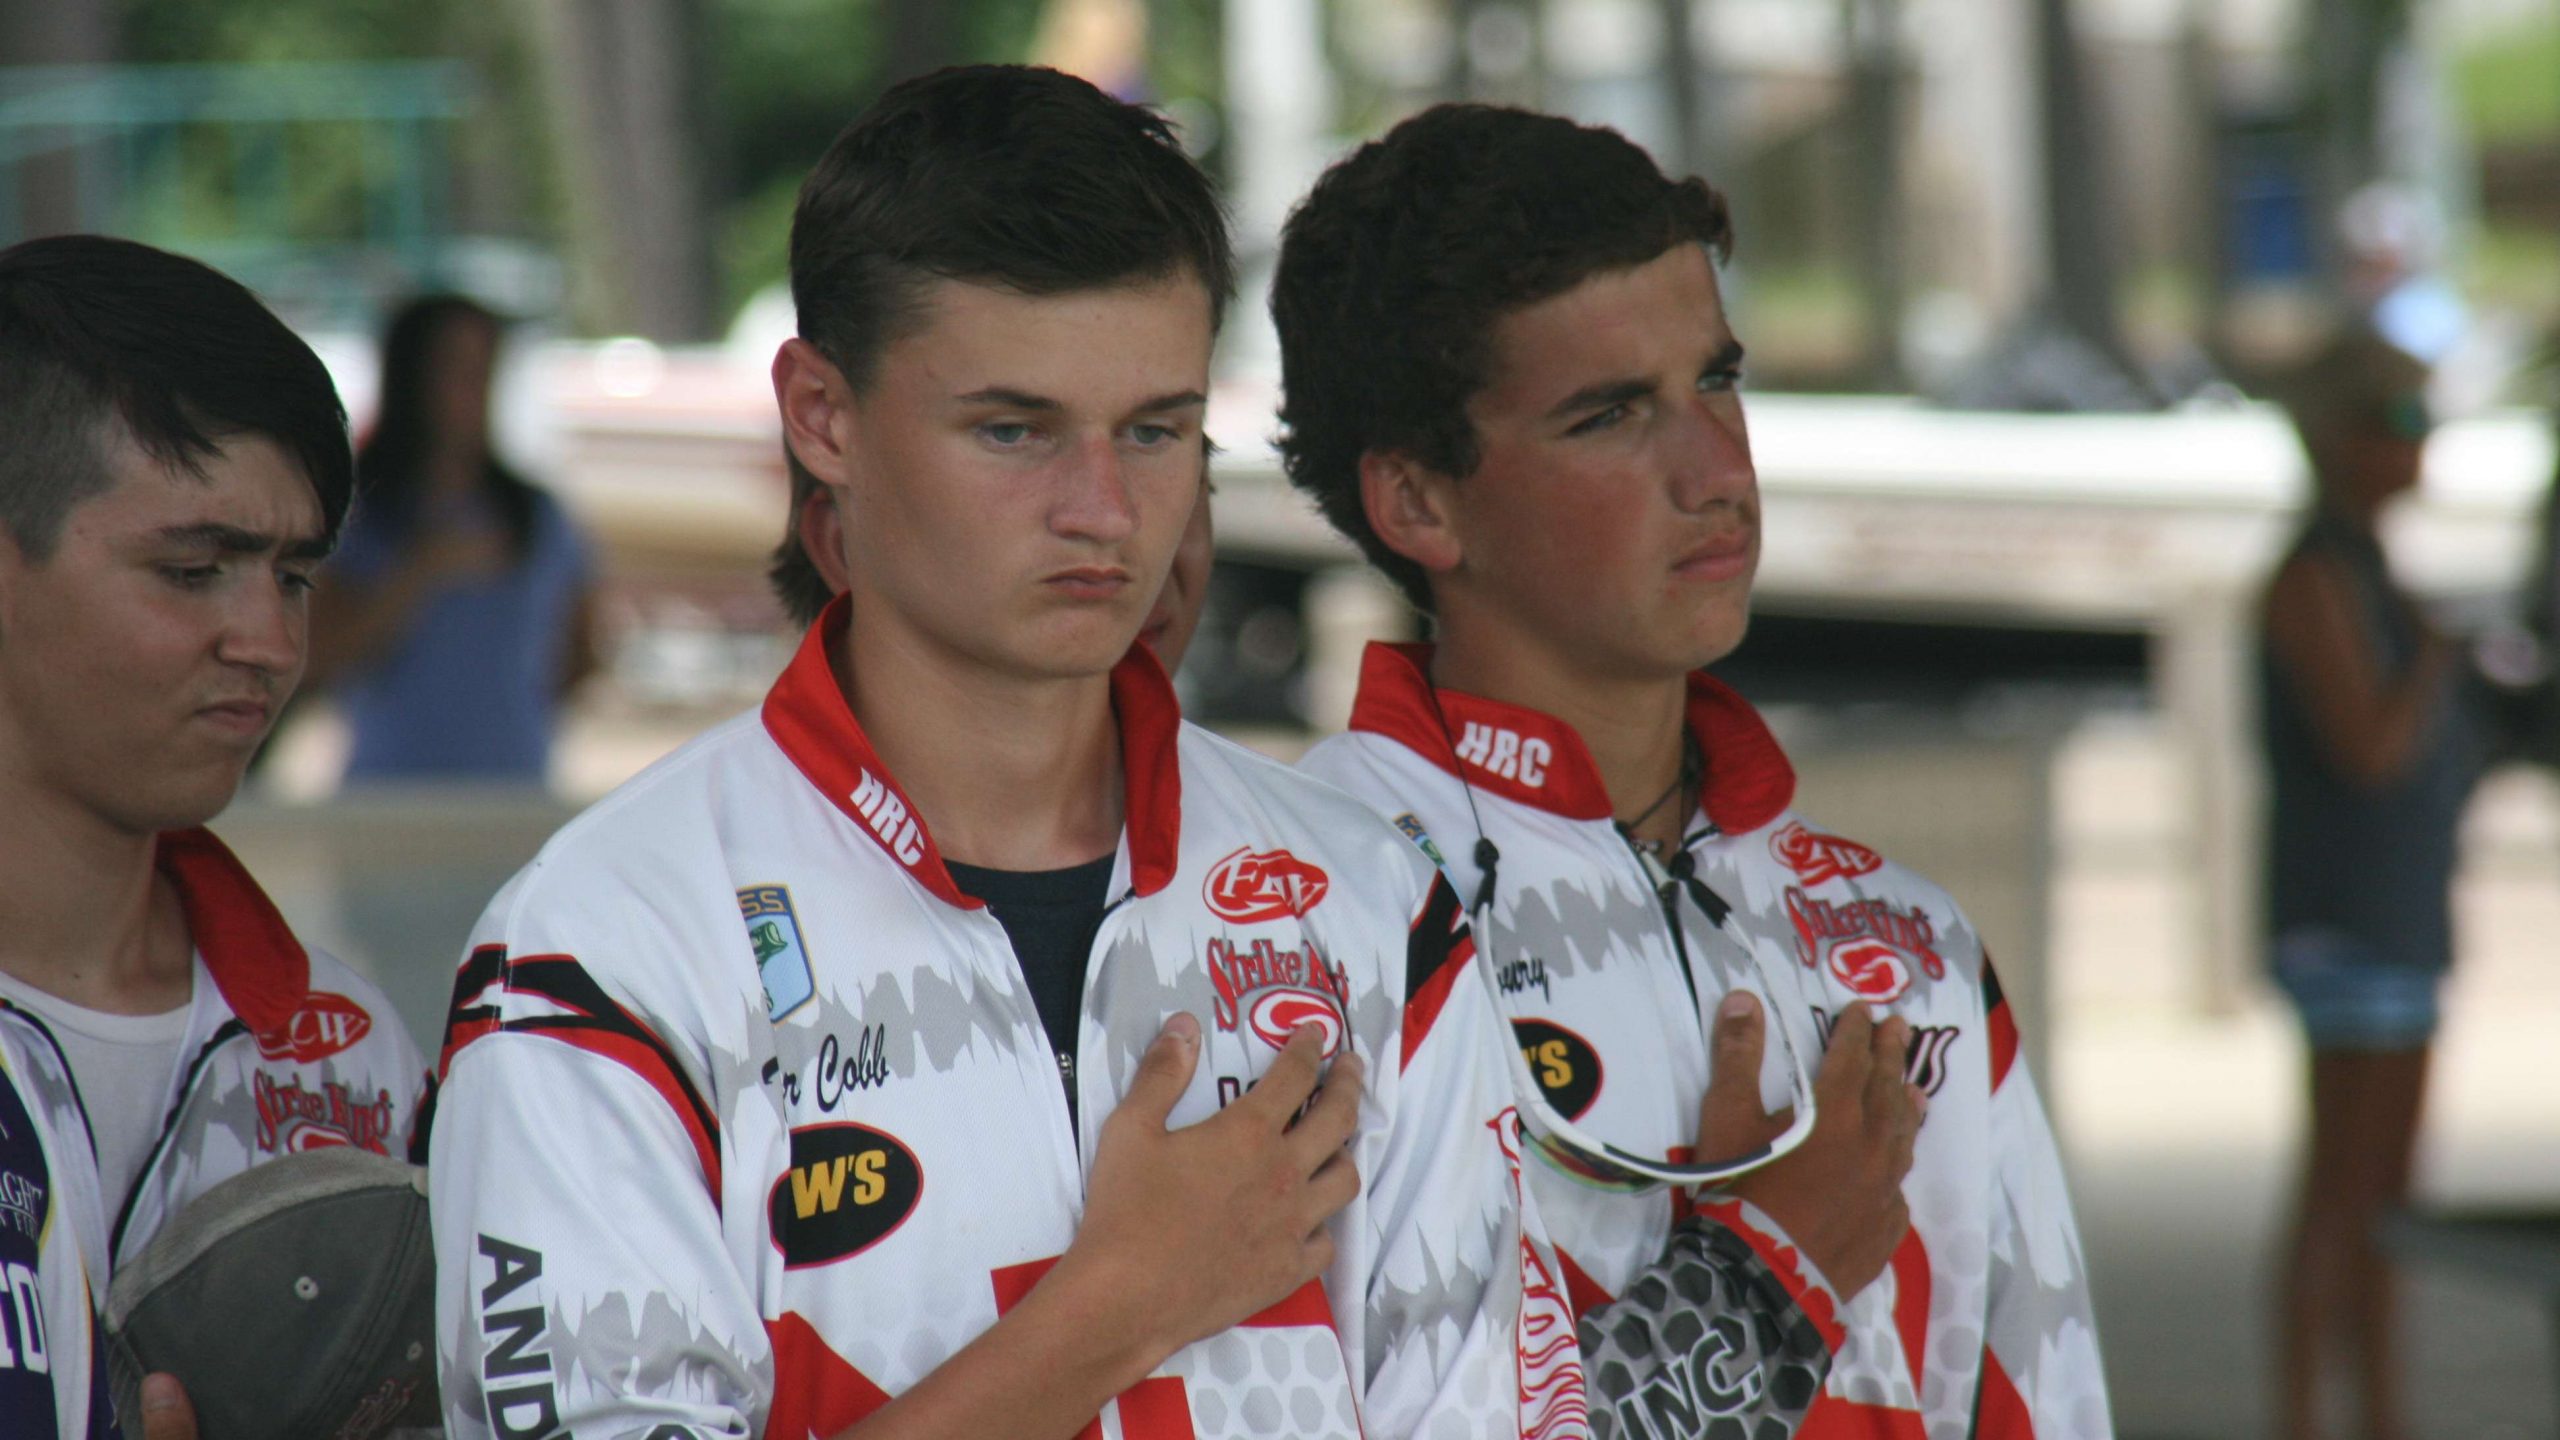 Anglers from the North DeSoto (La.) High School team reflect.